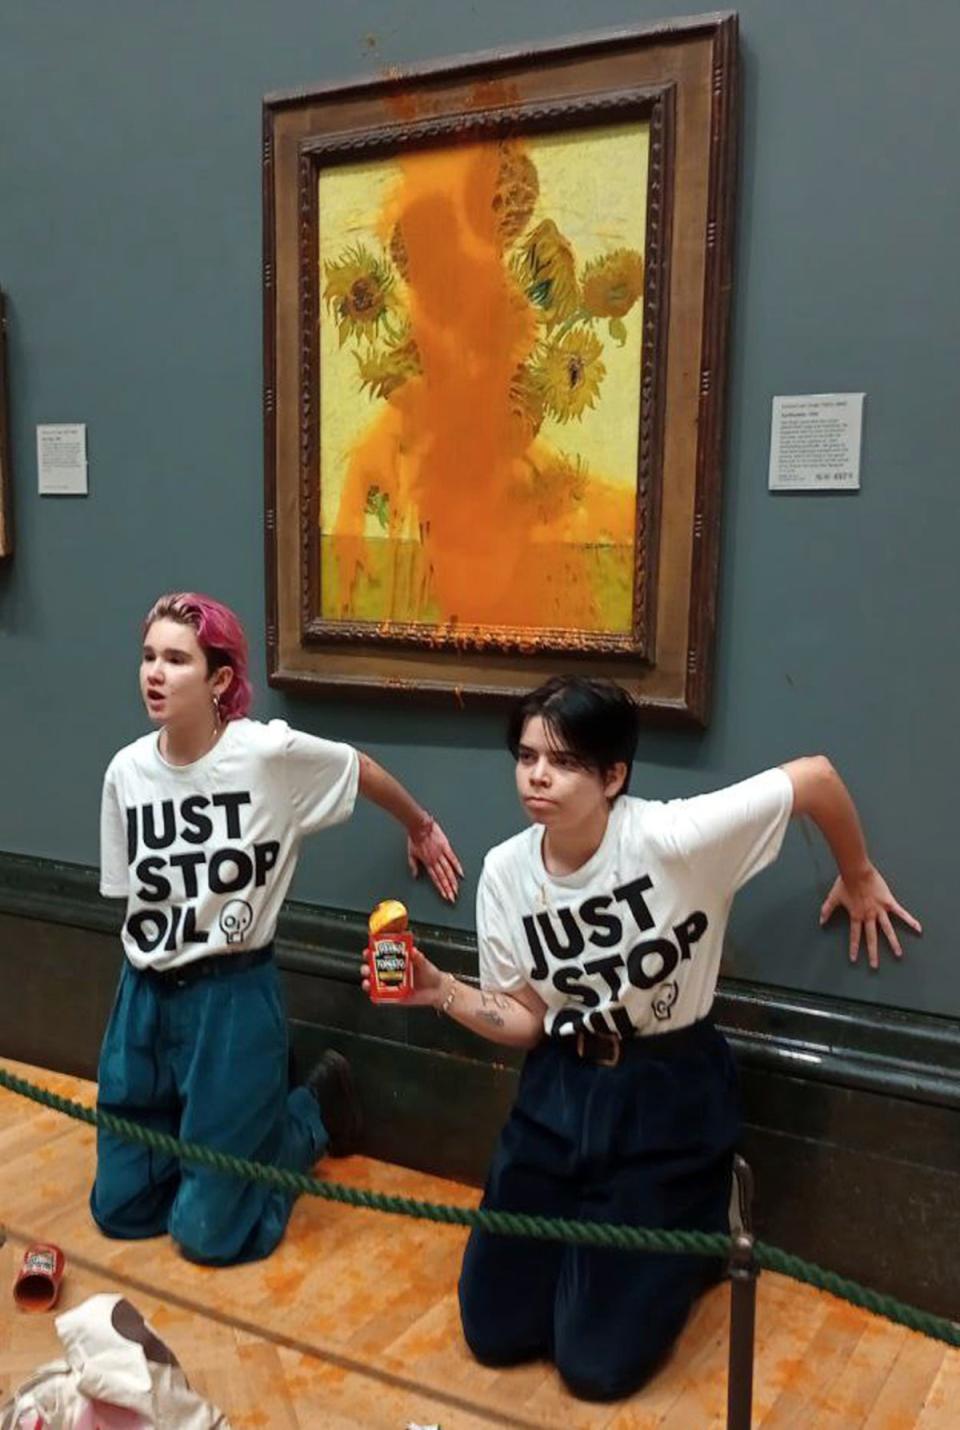 Two protesters who have thrown tinned soup at Vincent Van Gogh’s famous 1888 work Sunflowers at the National Gallery in London, Friday Oct. 14, 2022. The group Just Stop Oil, which wants the British government to halt new oil and gas projects, said activists dumped two cans of Heinz tomato soup over the oil painting on Friday. Londonâ€™s Metropolitan Police said officers arrested two people on suspicion of criminal damage and aggravated trespass. (Just Stop Oil via AP) (AP)